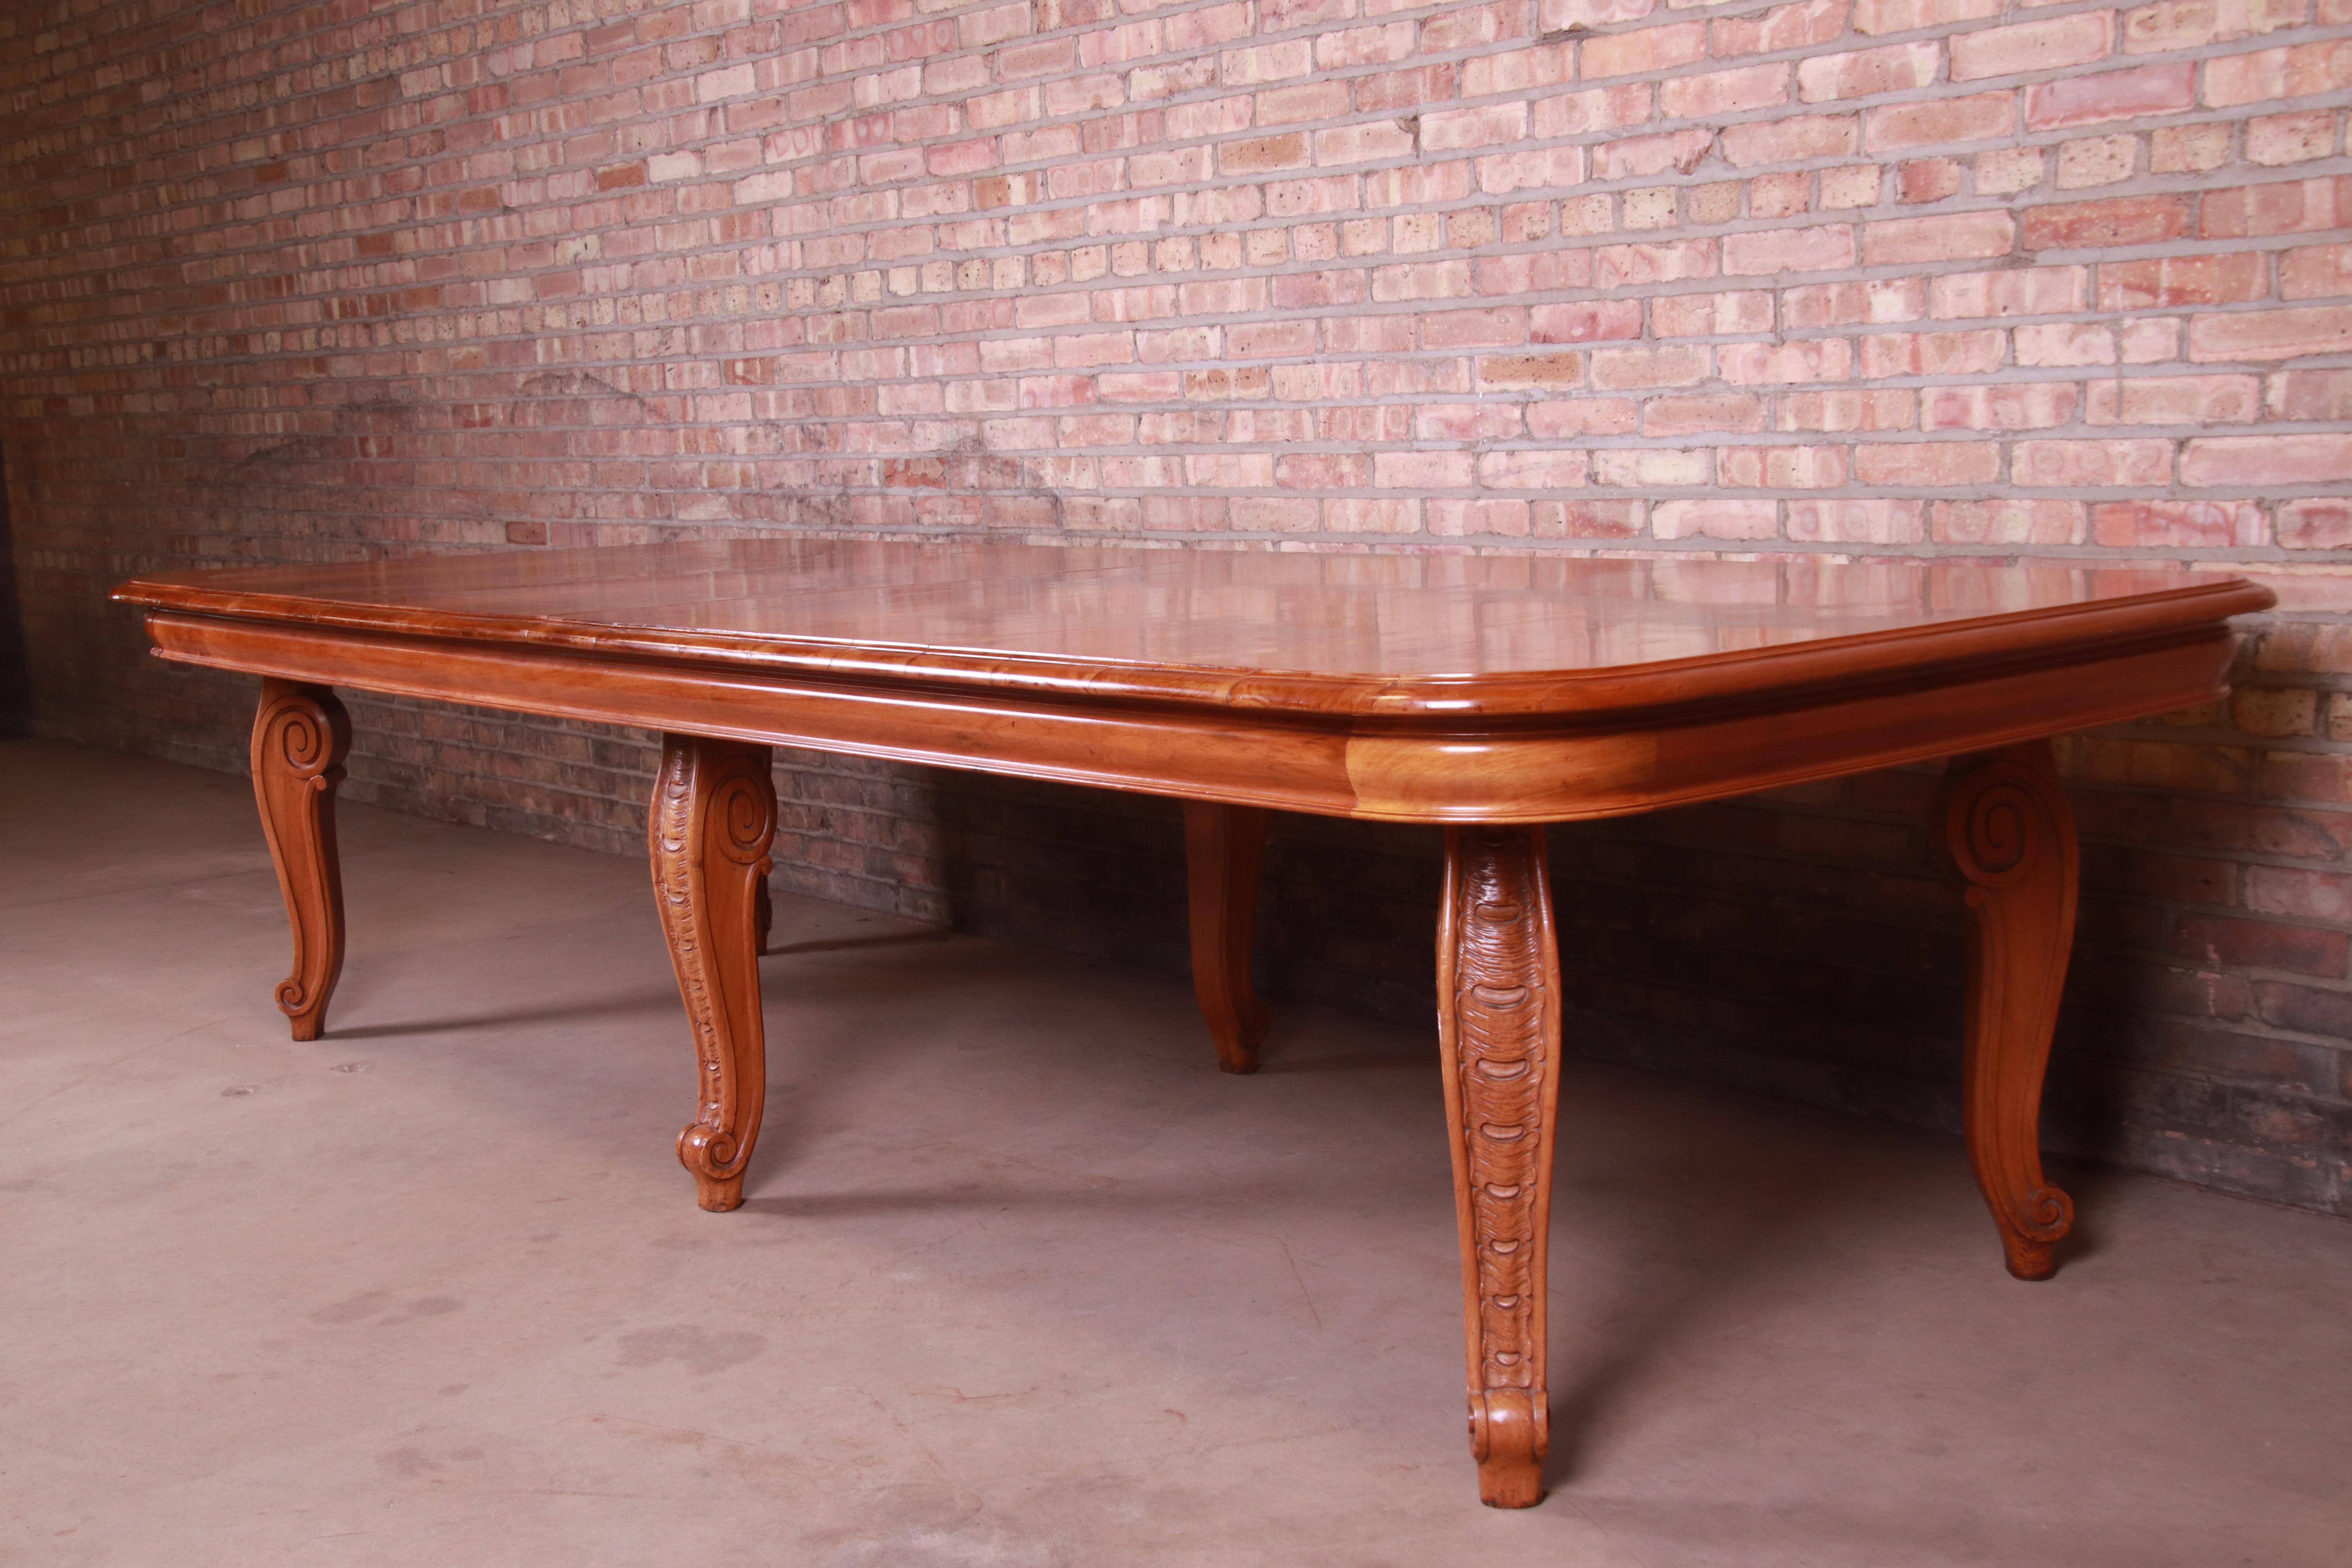 20th Century Antique French Carved Mahogany Dining Table with Cabriole Legs